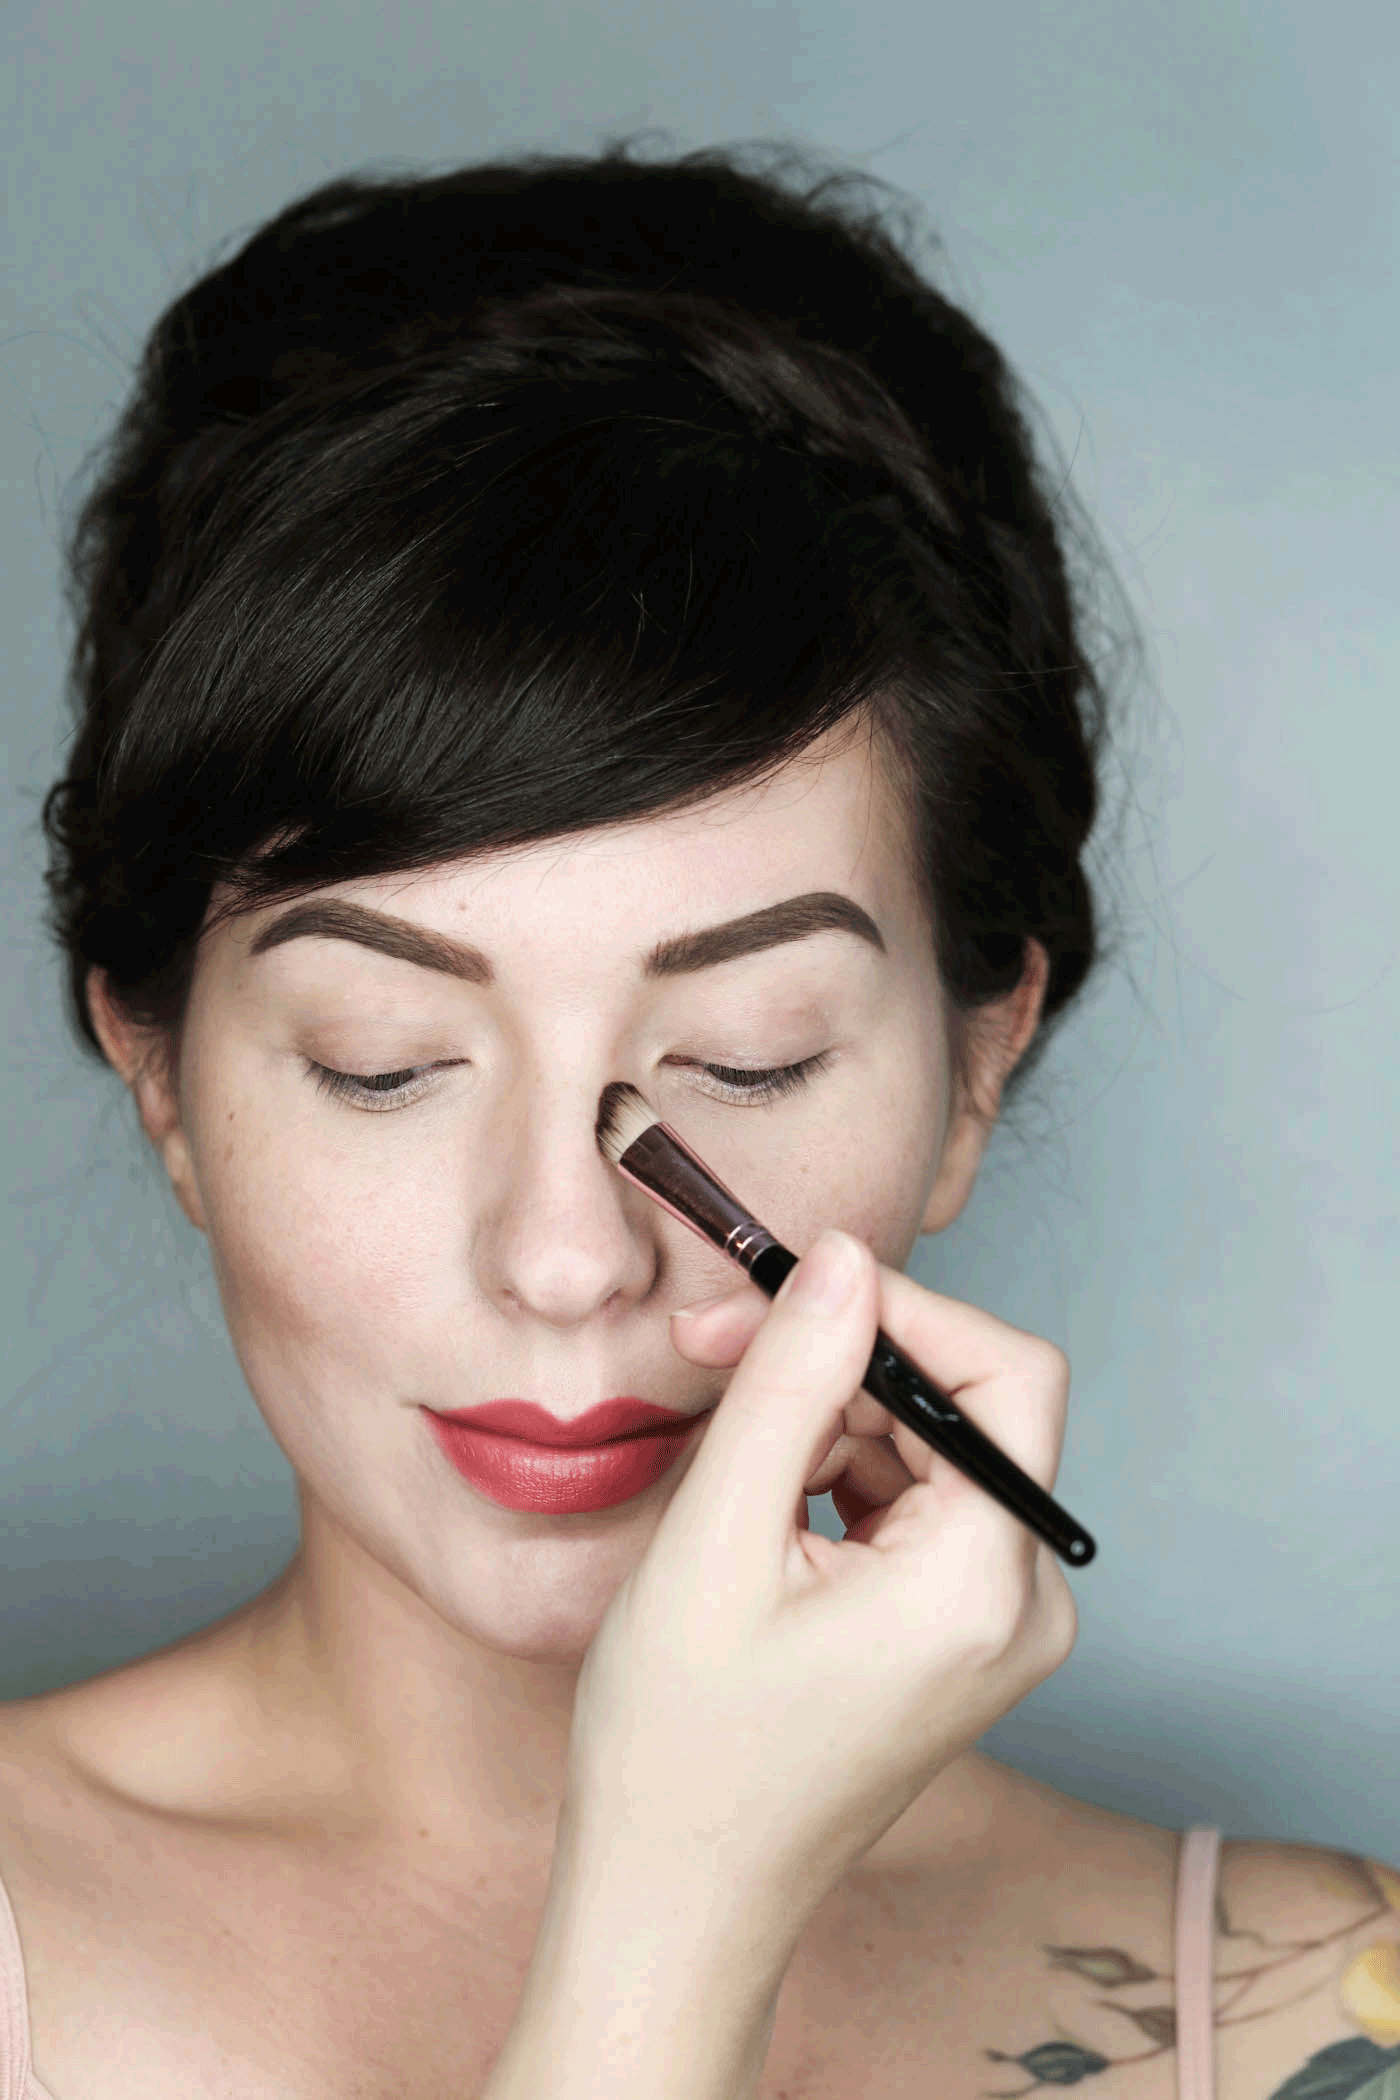 How to sculpt your face: basic contour, highlight, and blush tutorial